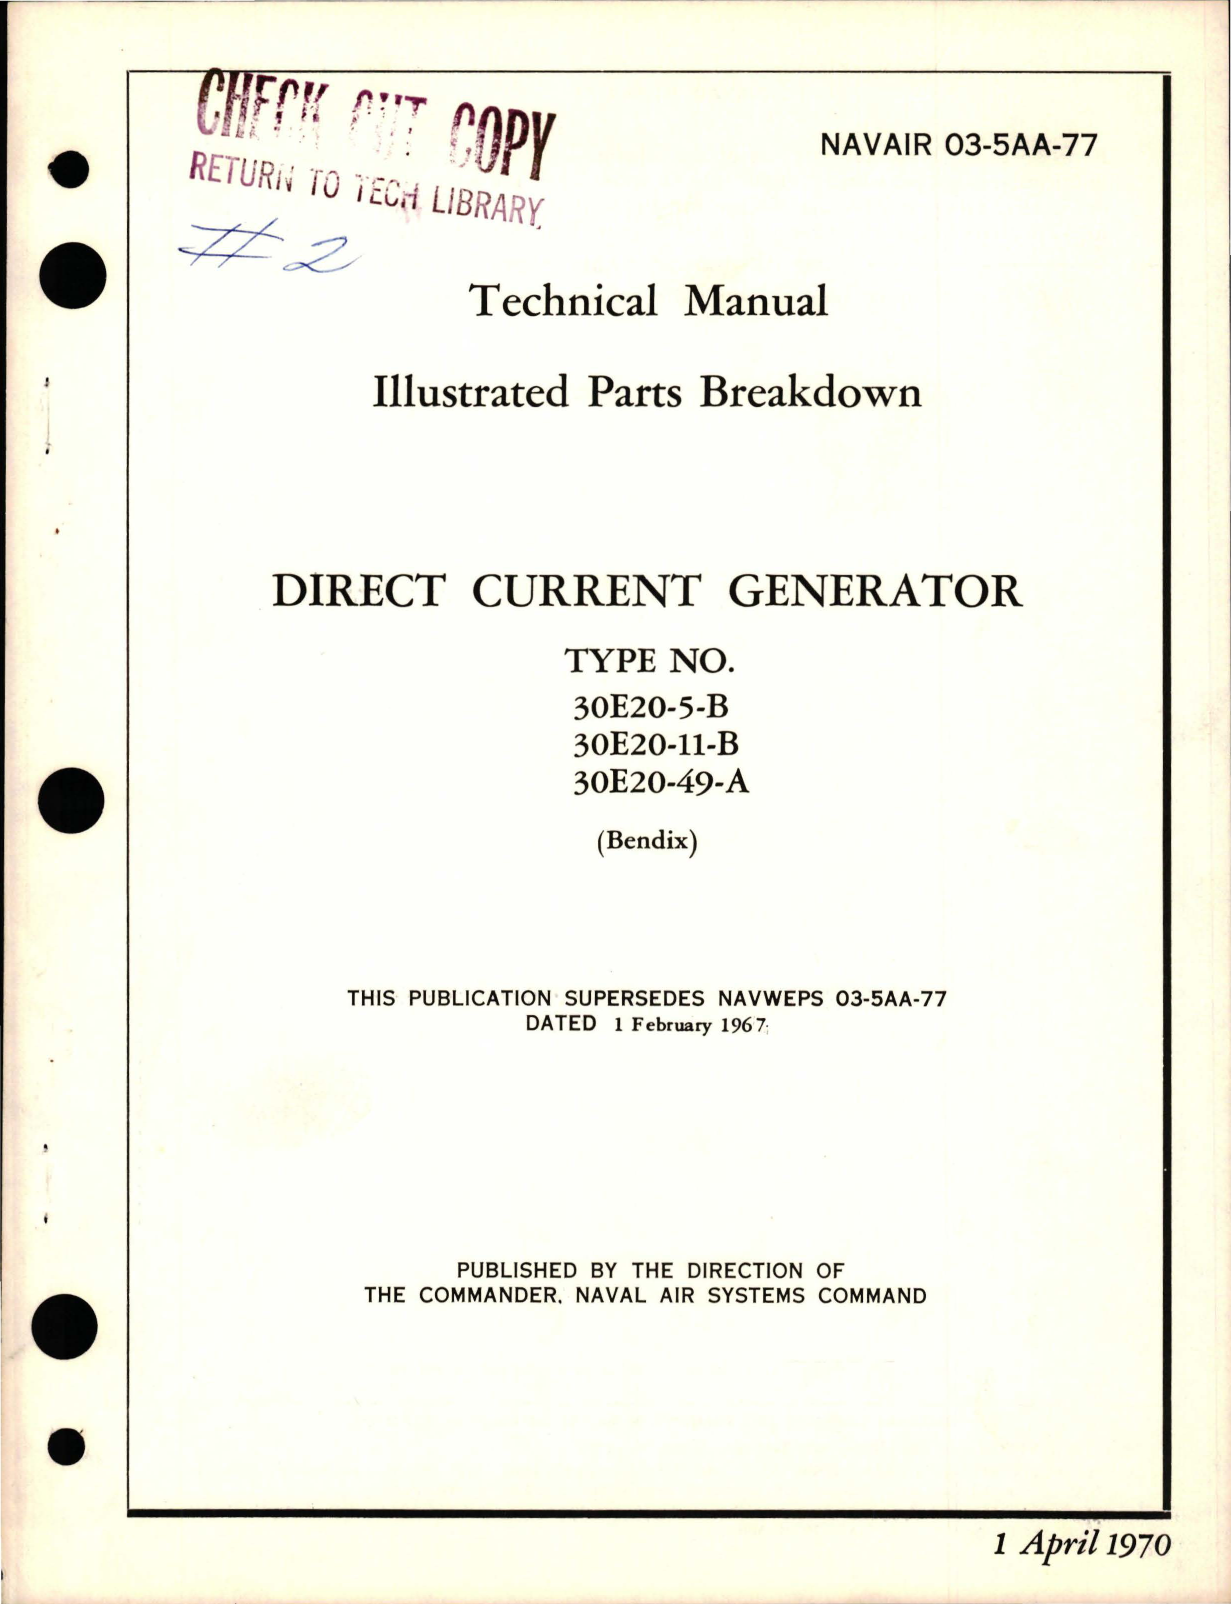 Sample page 1 from AirCorps Library document: Illustrated Parts Breakdown for Direct Current Generator - Types 30E20-5-B, 30E20-11-B, and 30E20-49-A